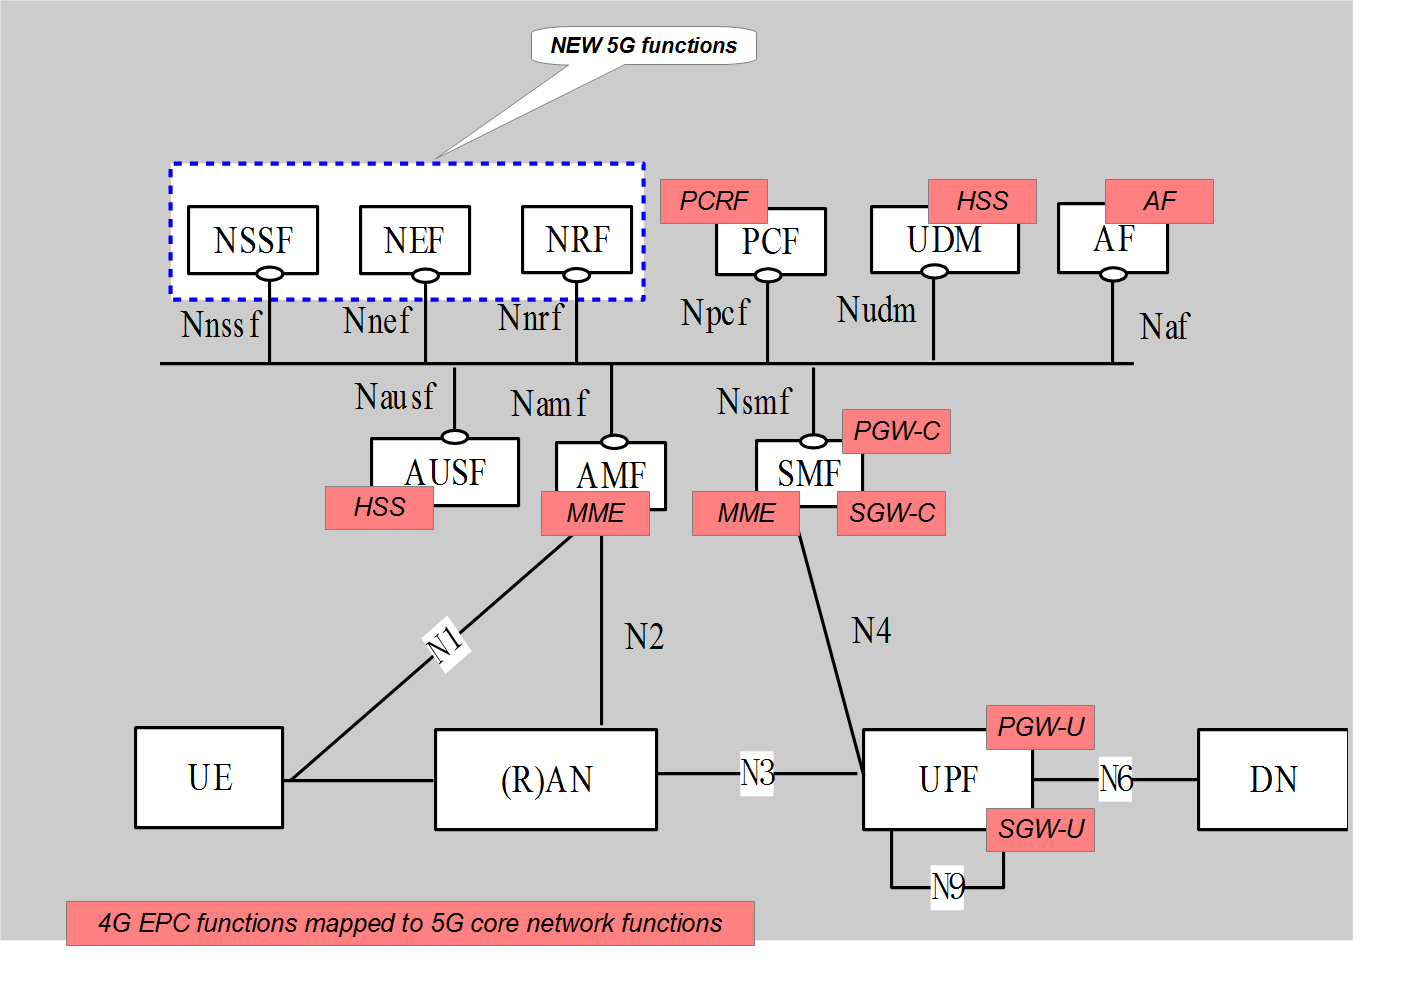 Fig 6: Mapping 4G EPC functions and 5G core network functions